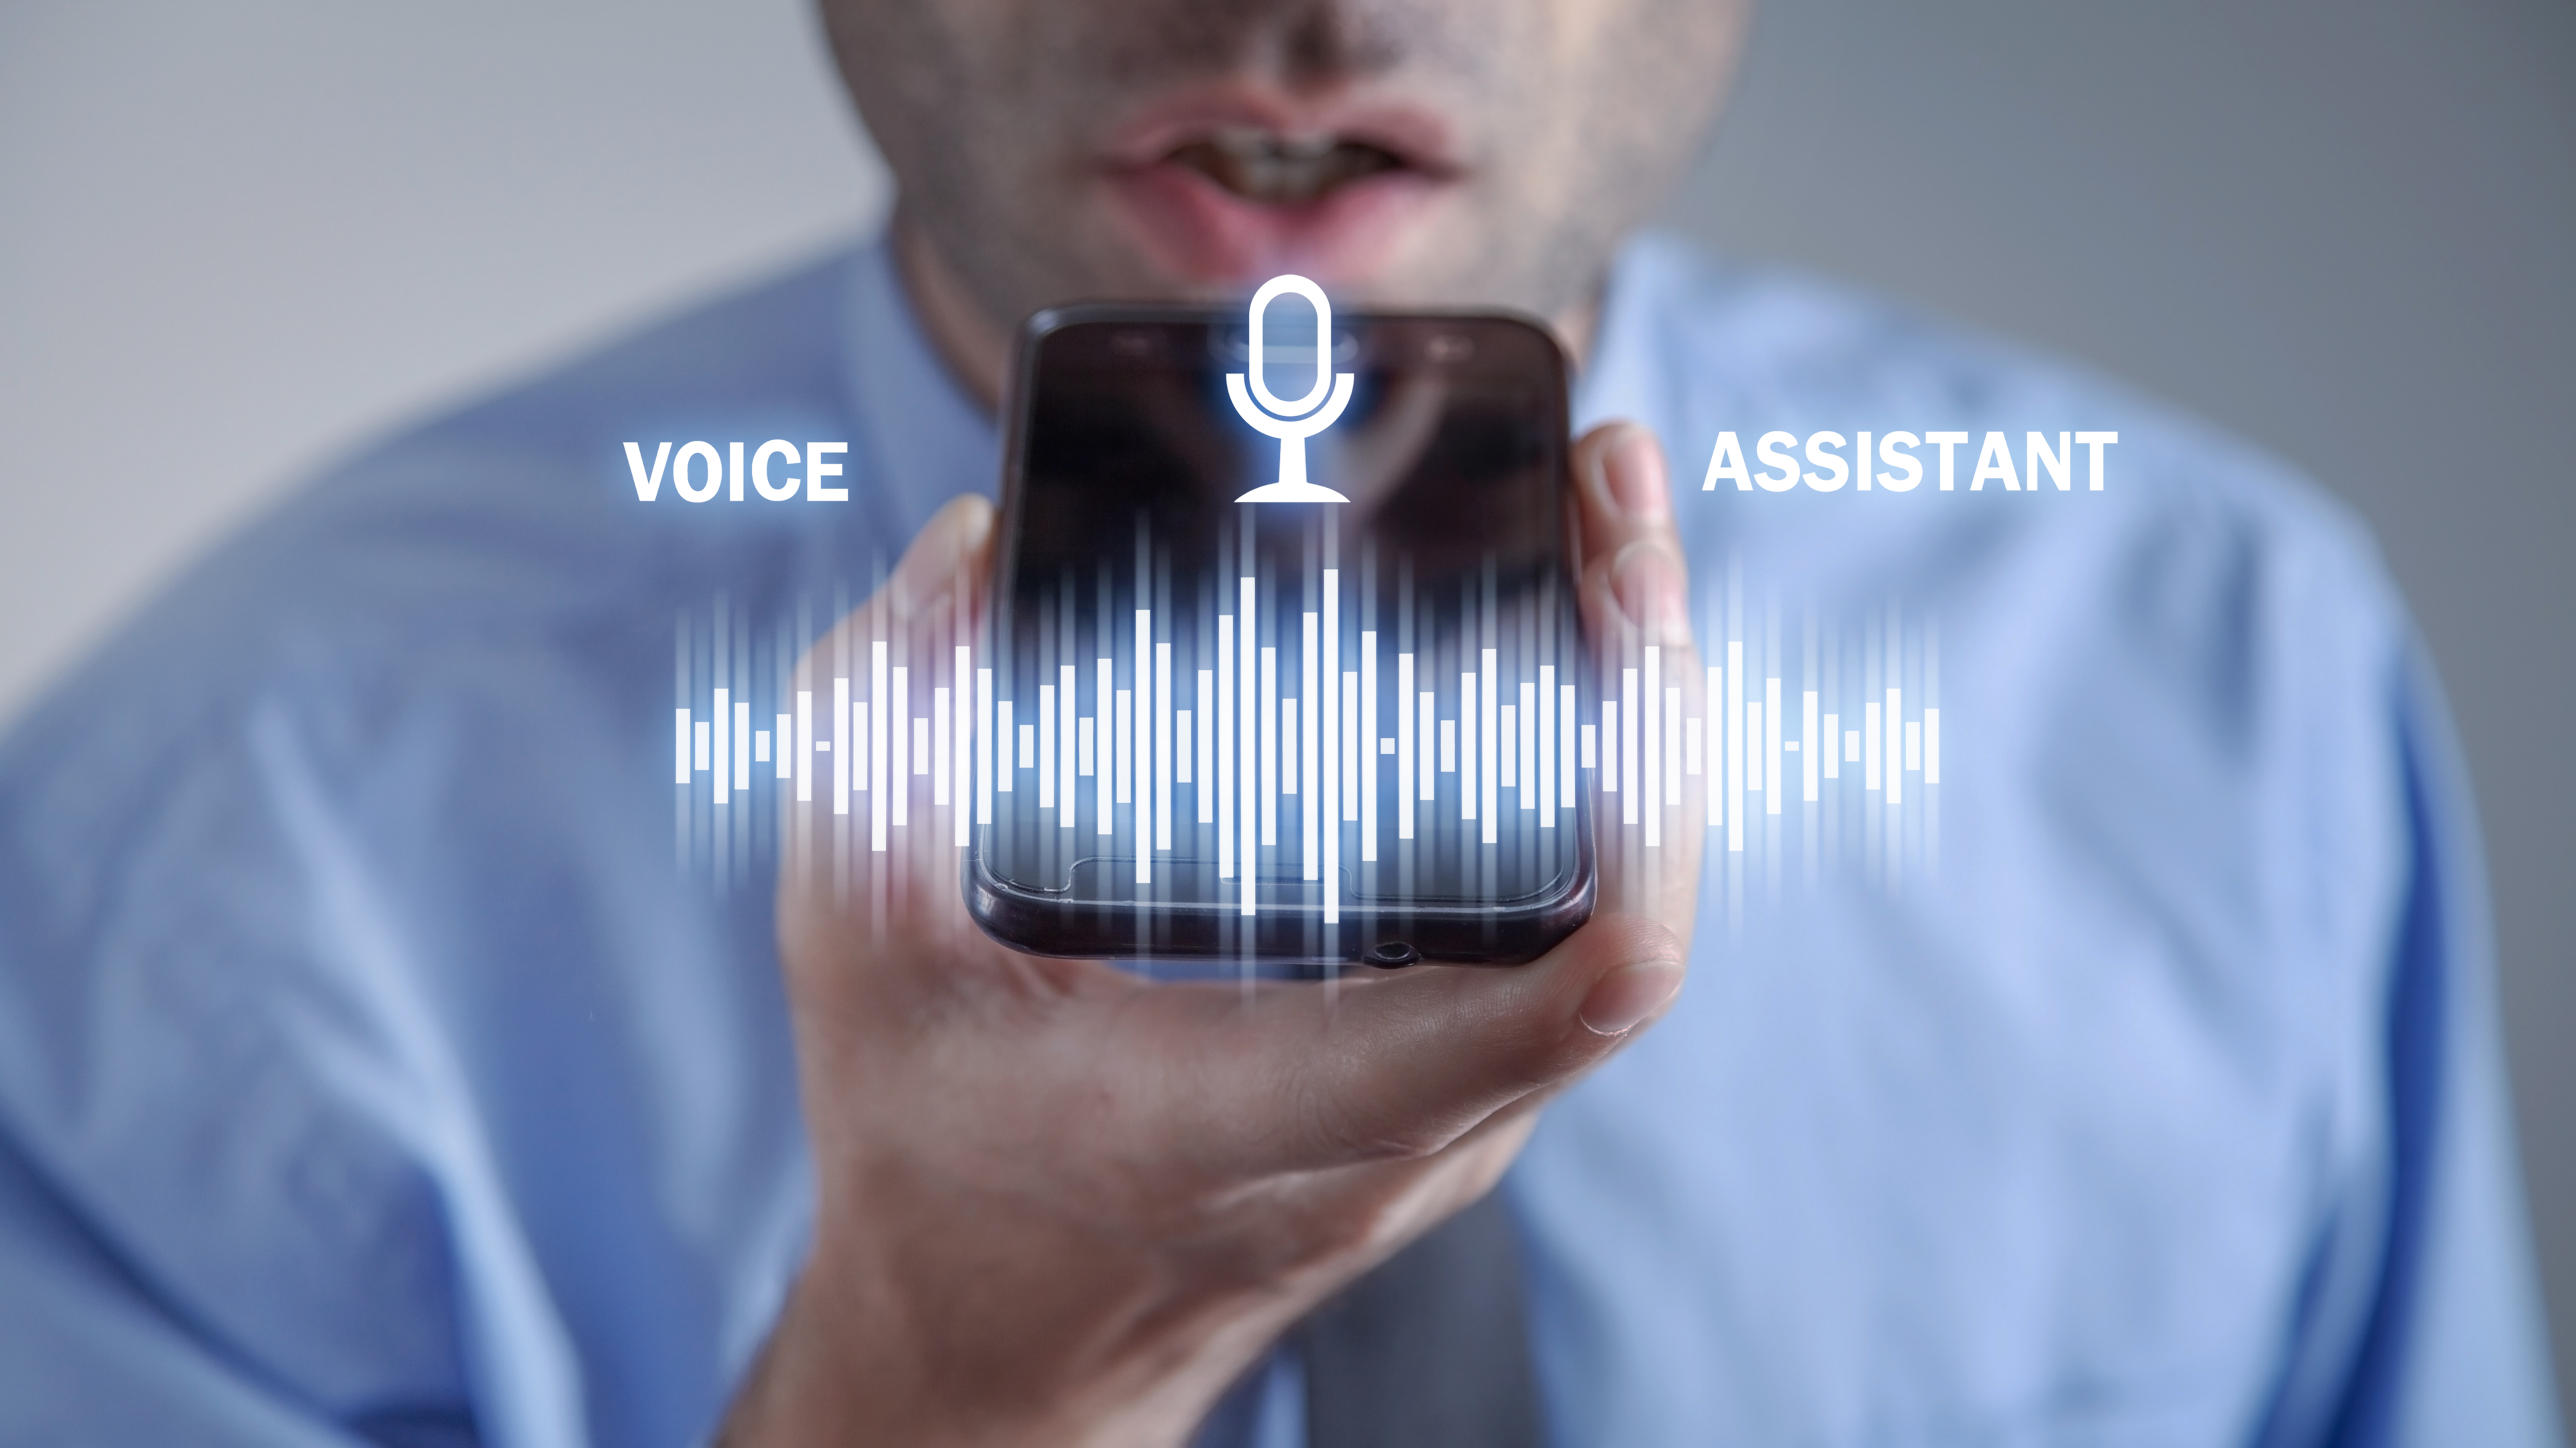 man-using-smartphone-voice-assistant